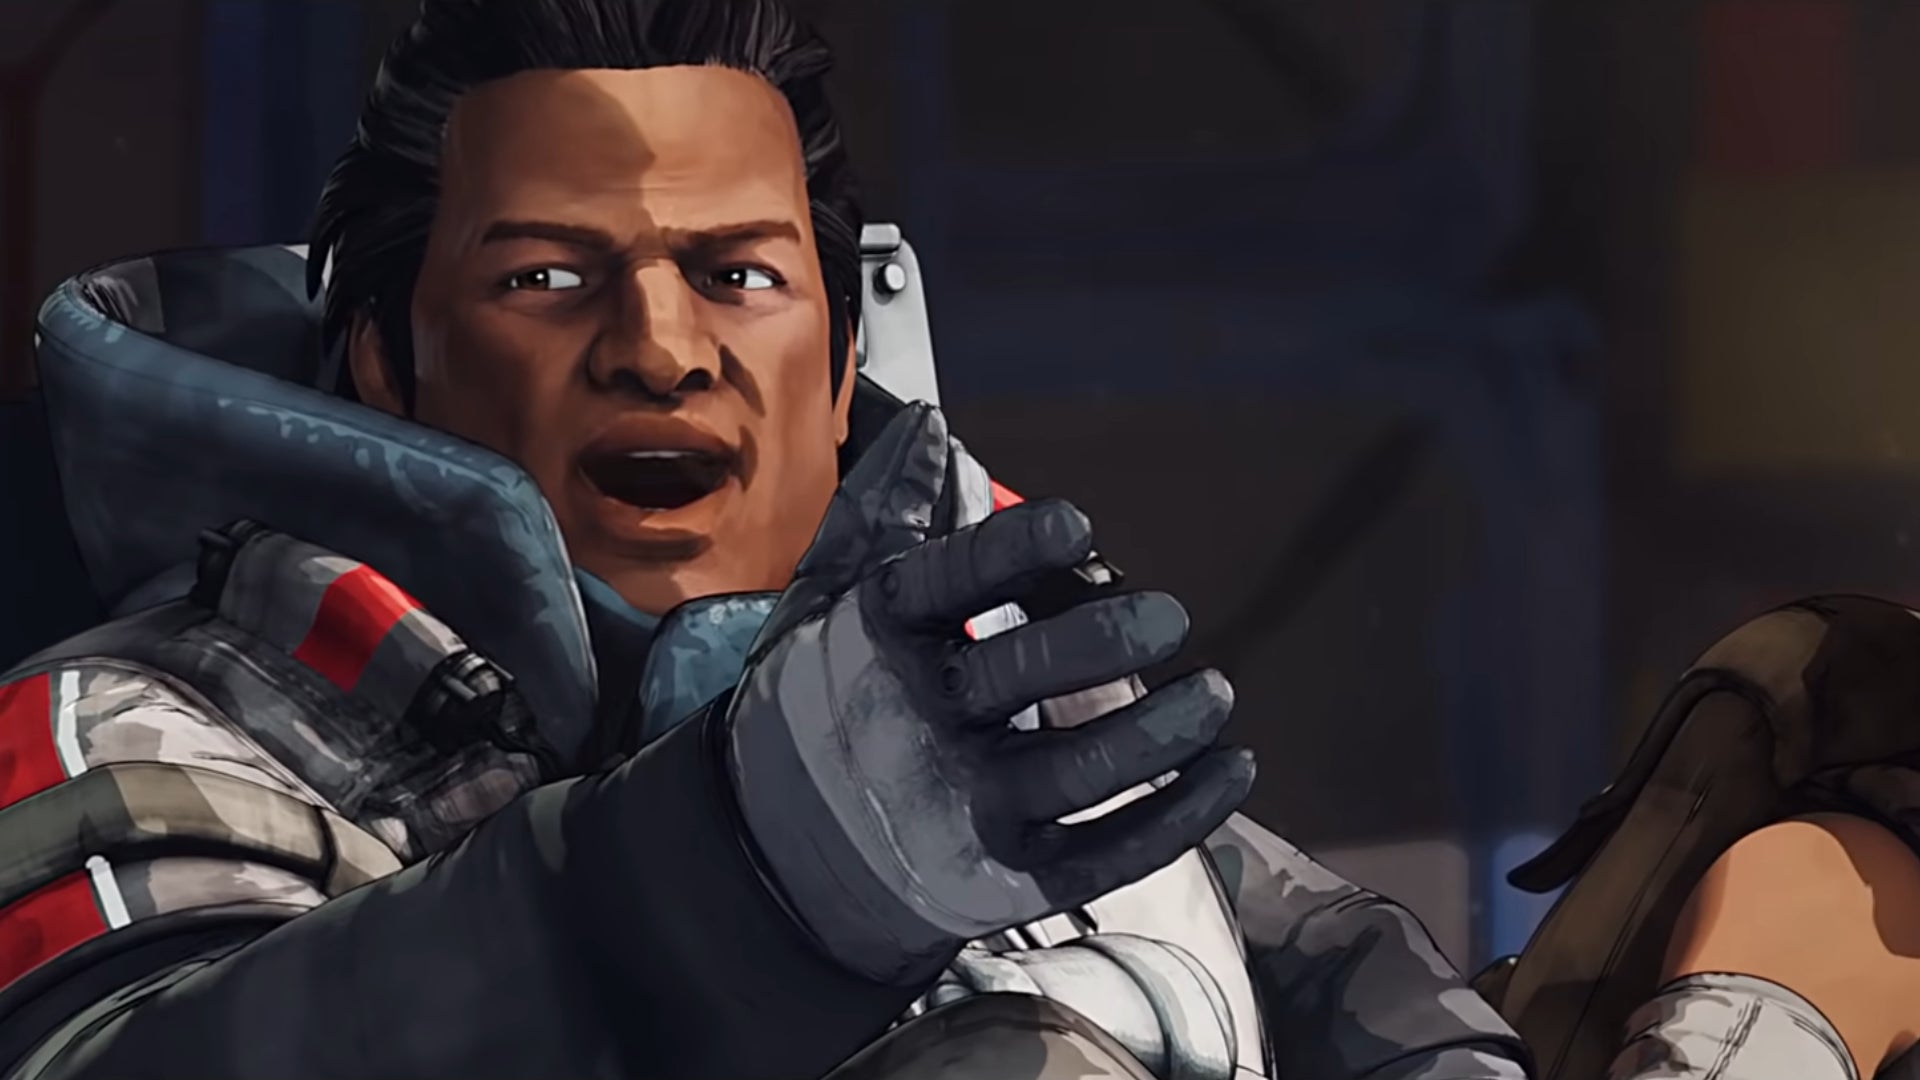 Gibraltar sits and gestures animatedly while talking in Apex Legends.